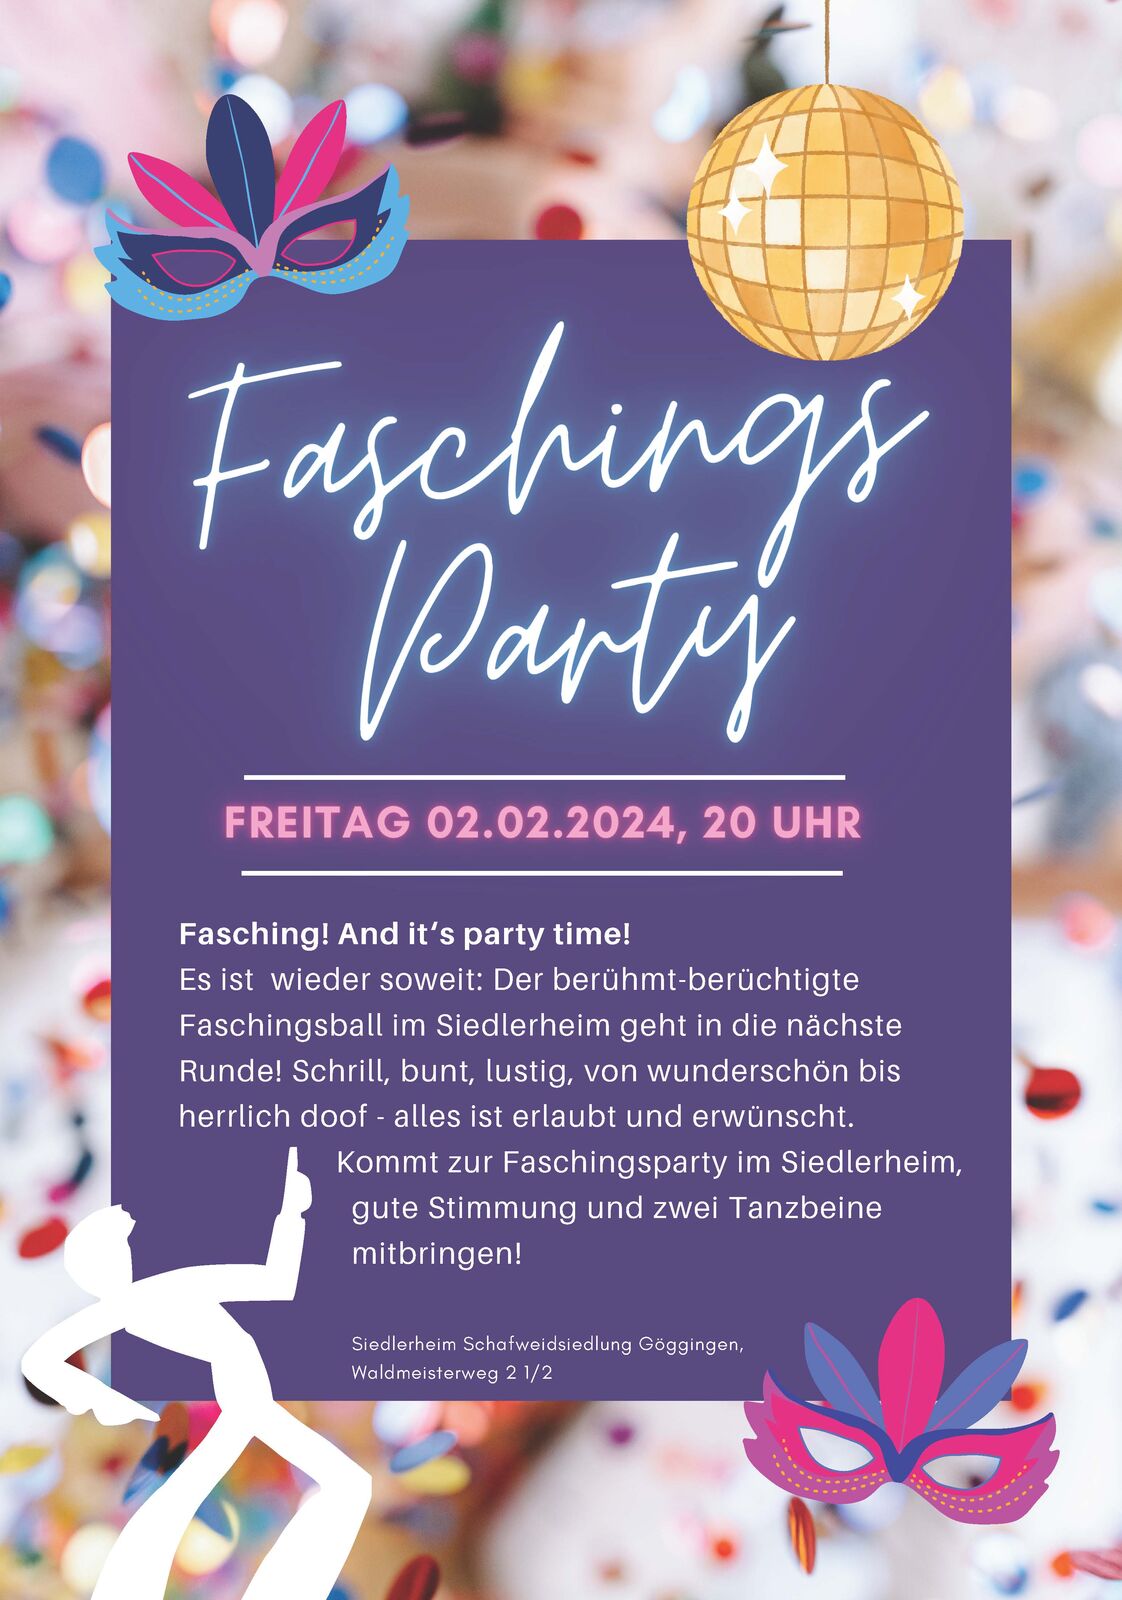 FaschingsParty